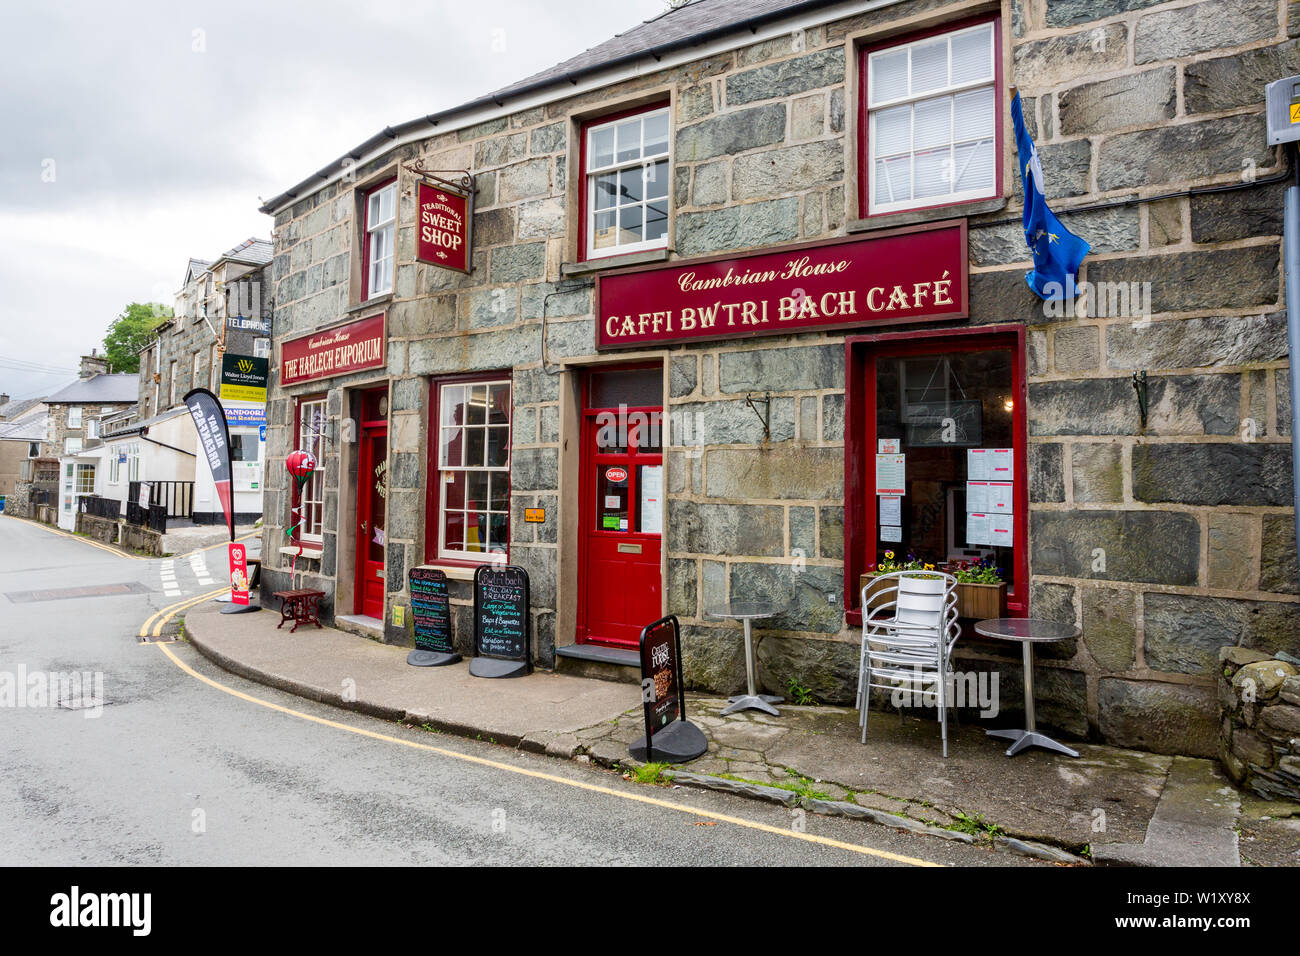 Heavy stone architecture of a cafe and traditional sweet shop in Harlech, Gwynedd, Wales, UK Stock Photo